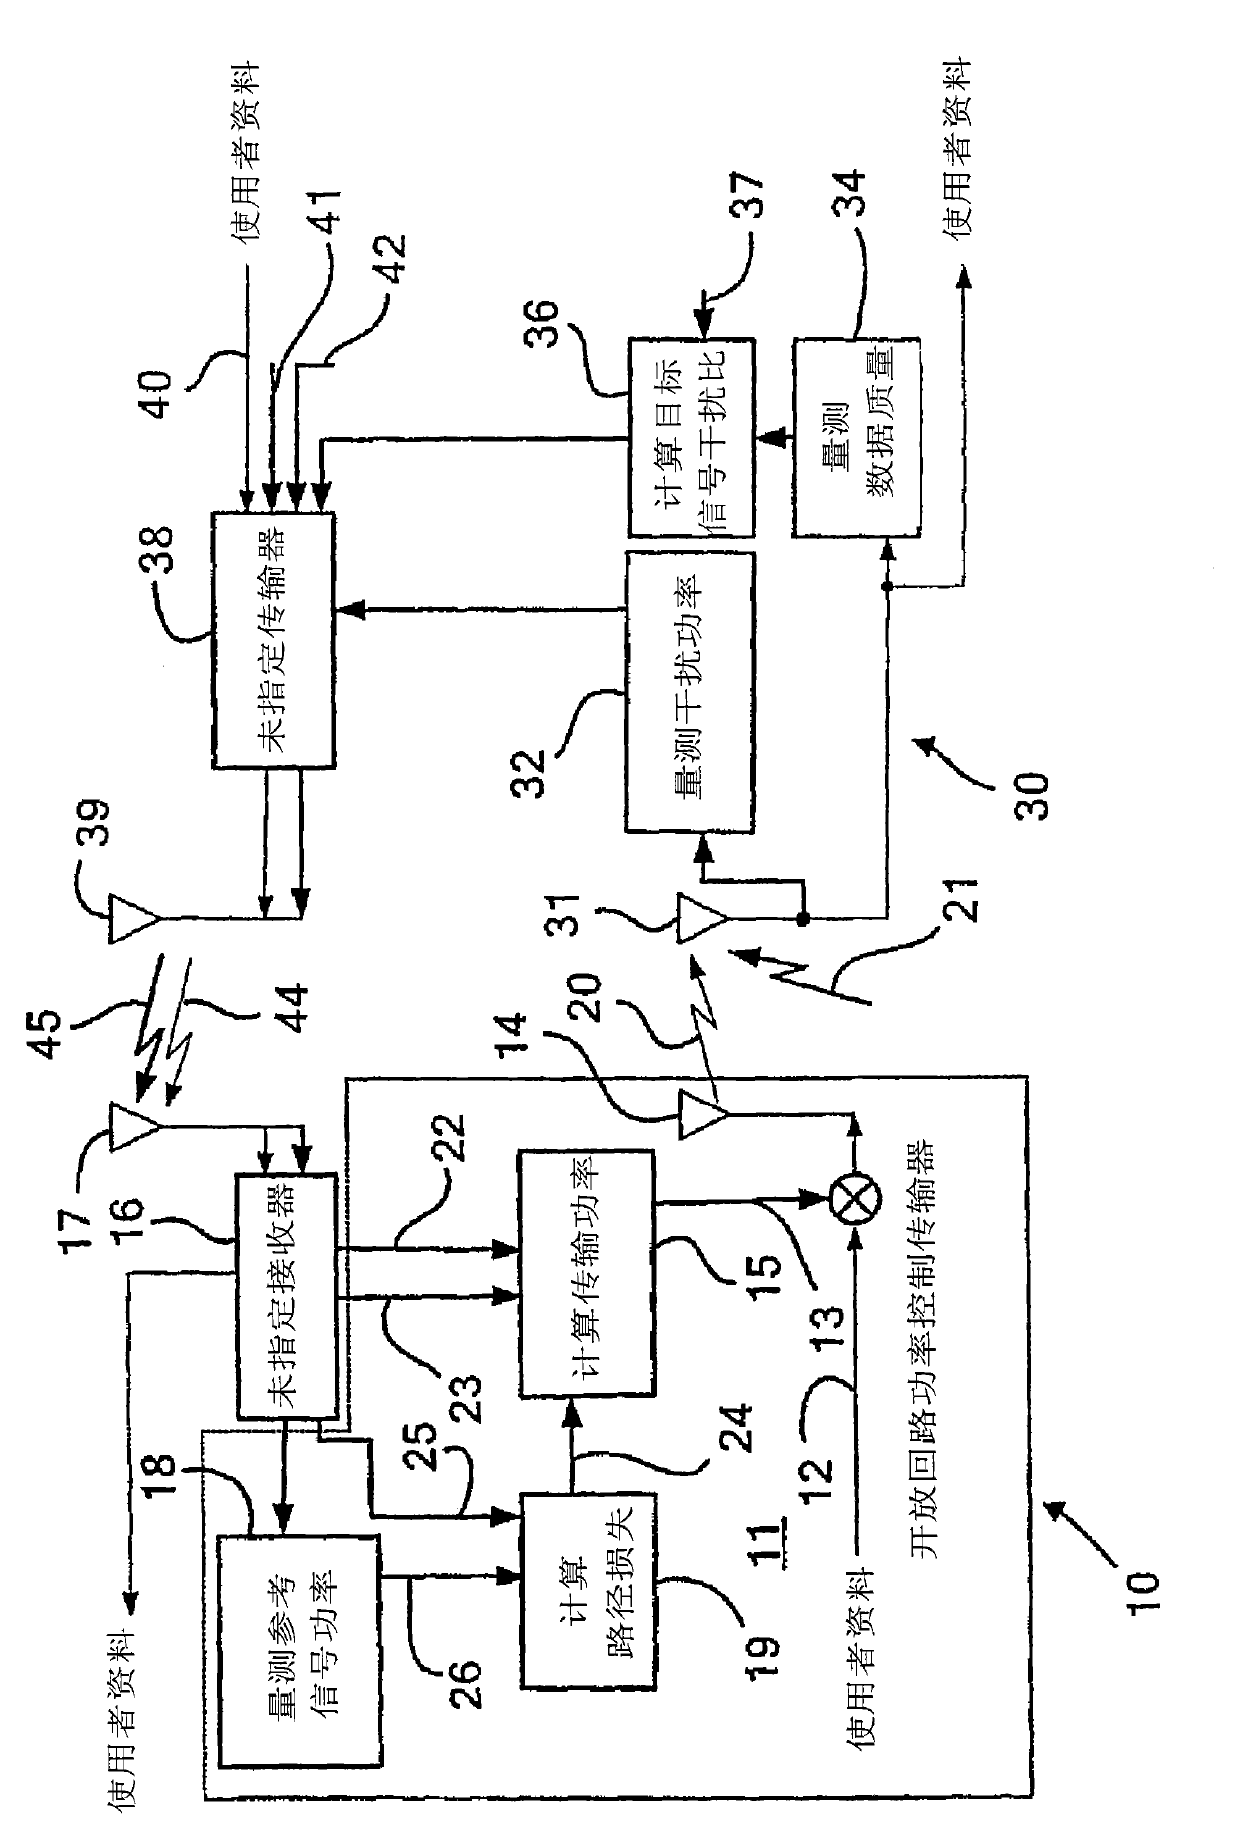 Outer loop power control for wireless communication systems